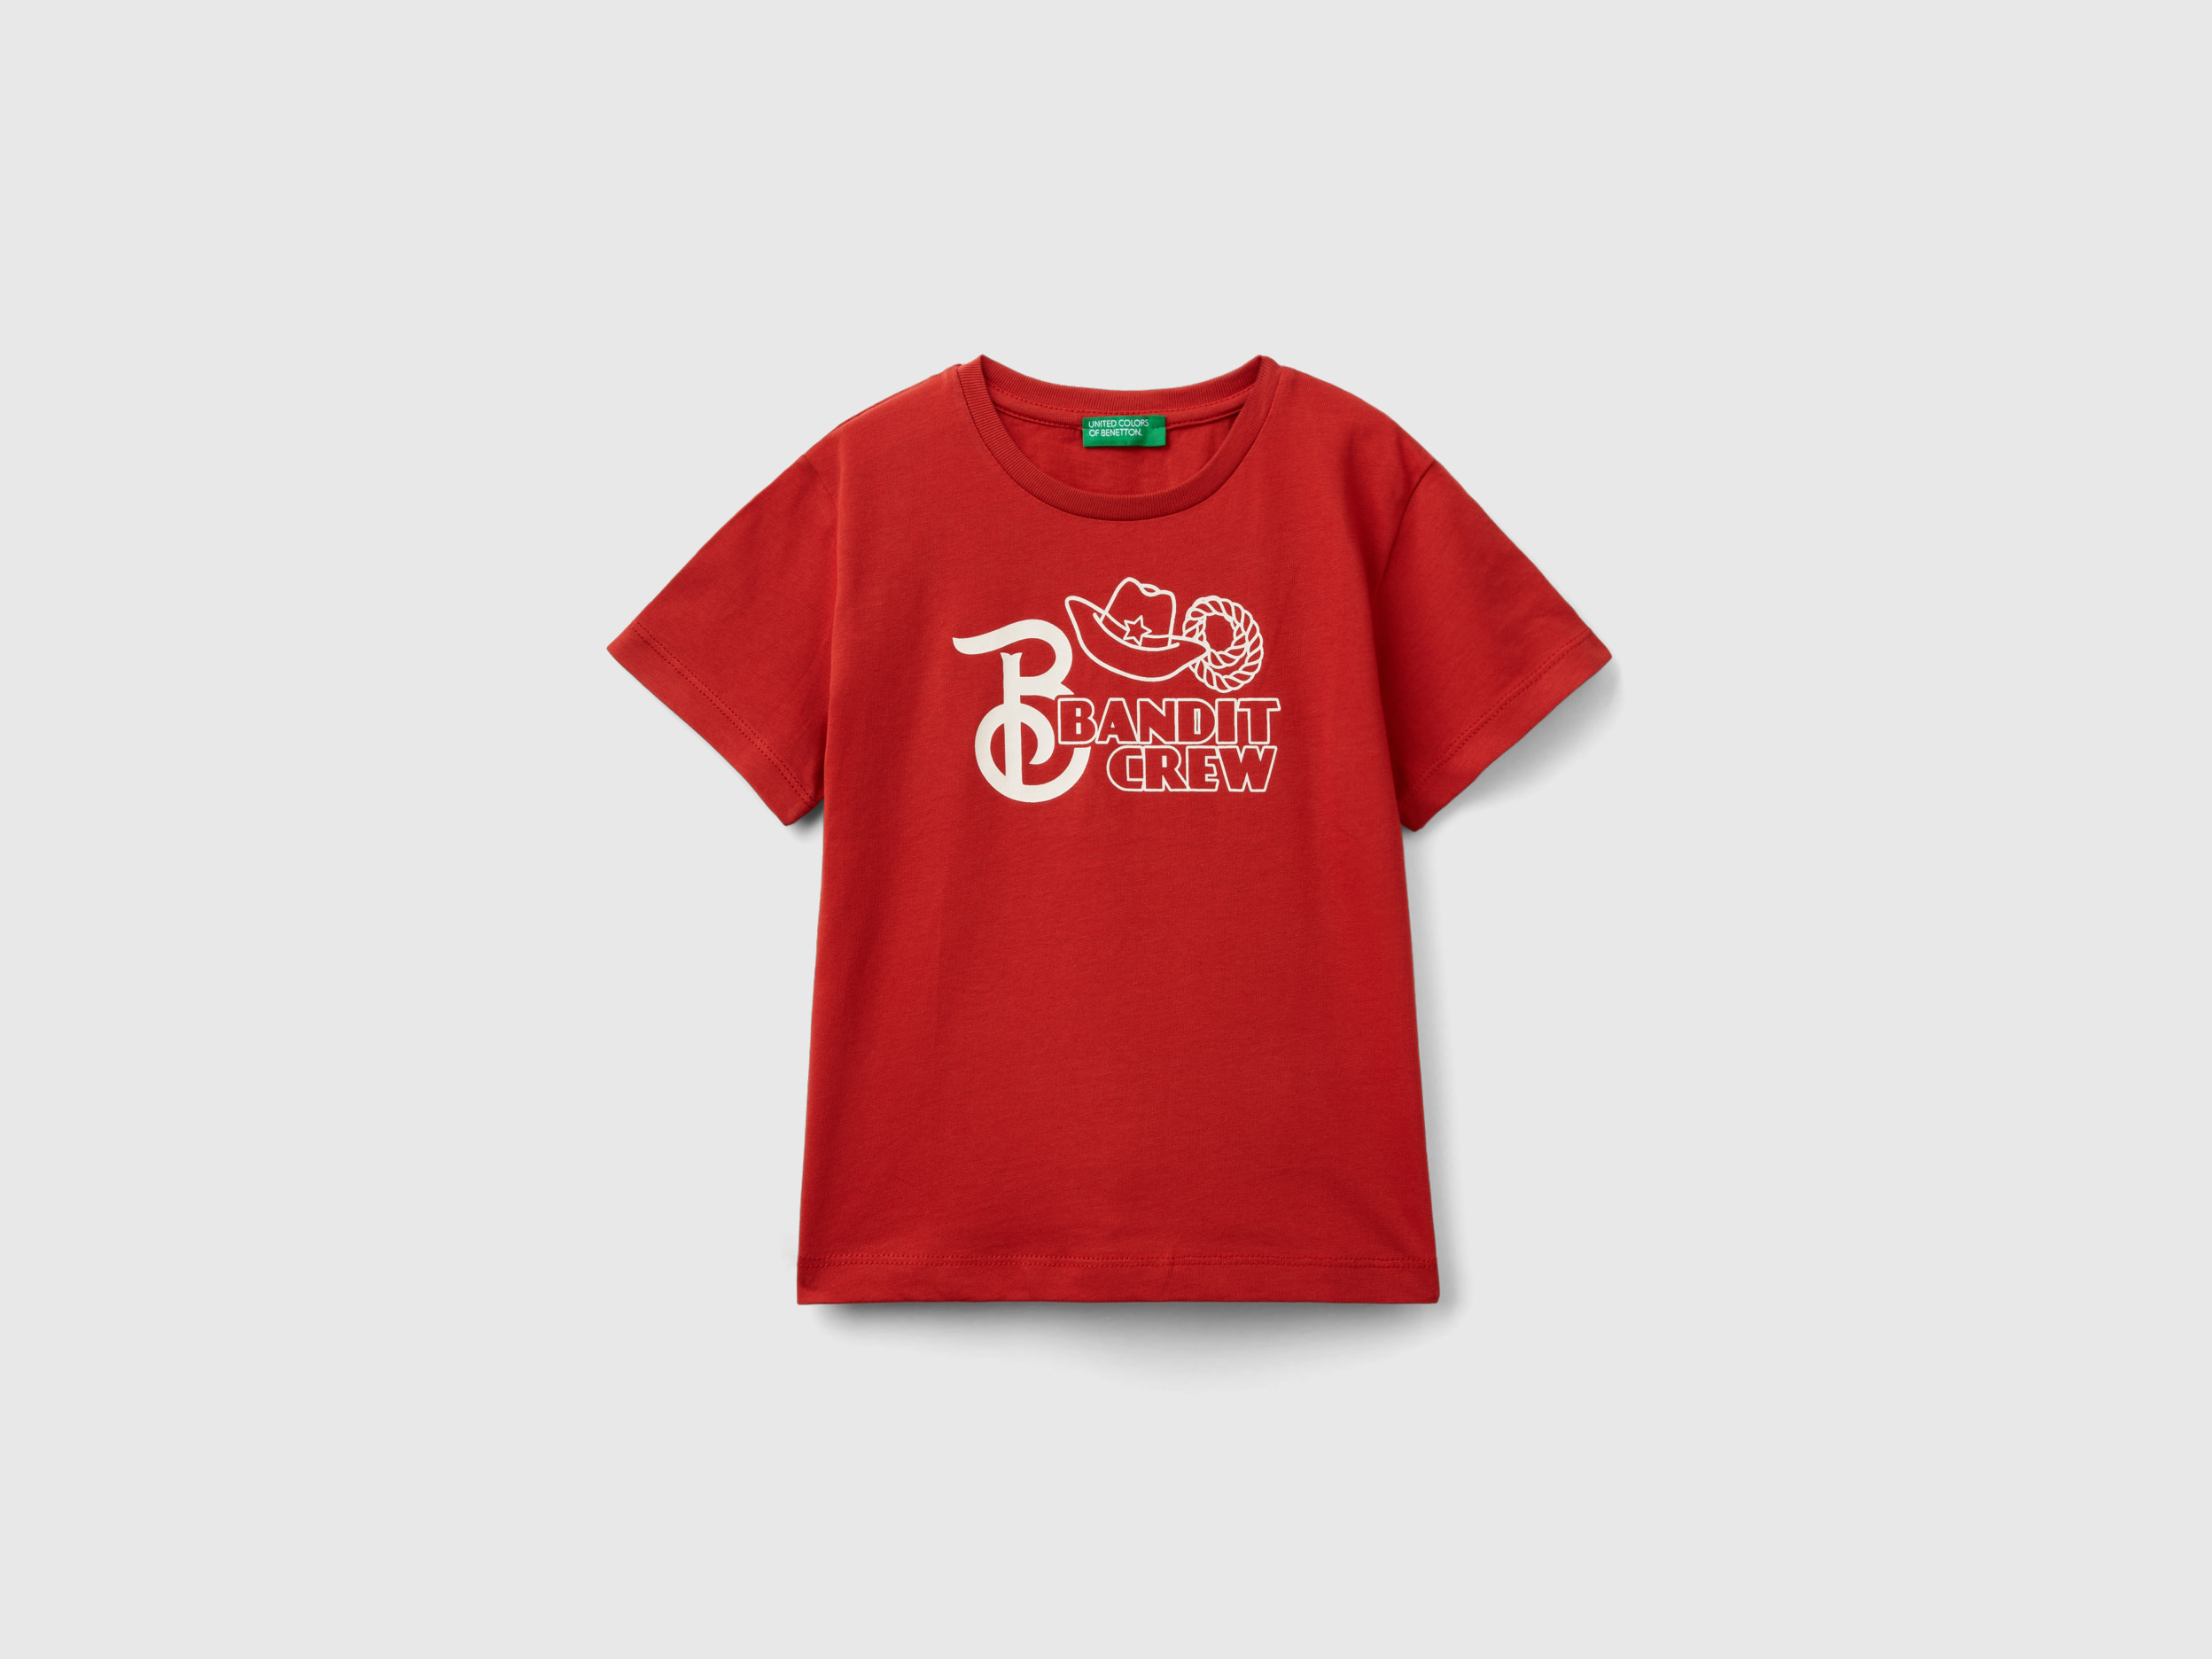 Benetton, T-shirt In Organic Cotton With Print, size 4-5, Red, Kids